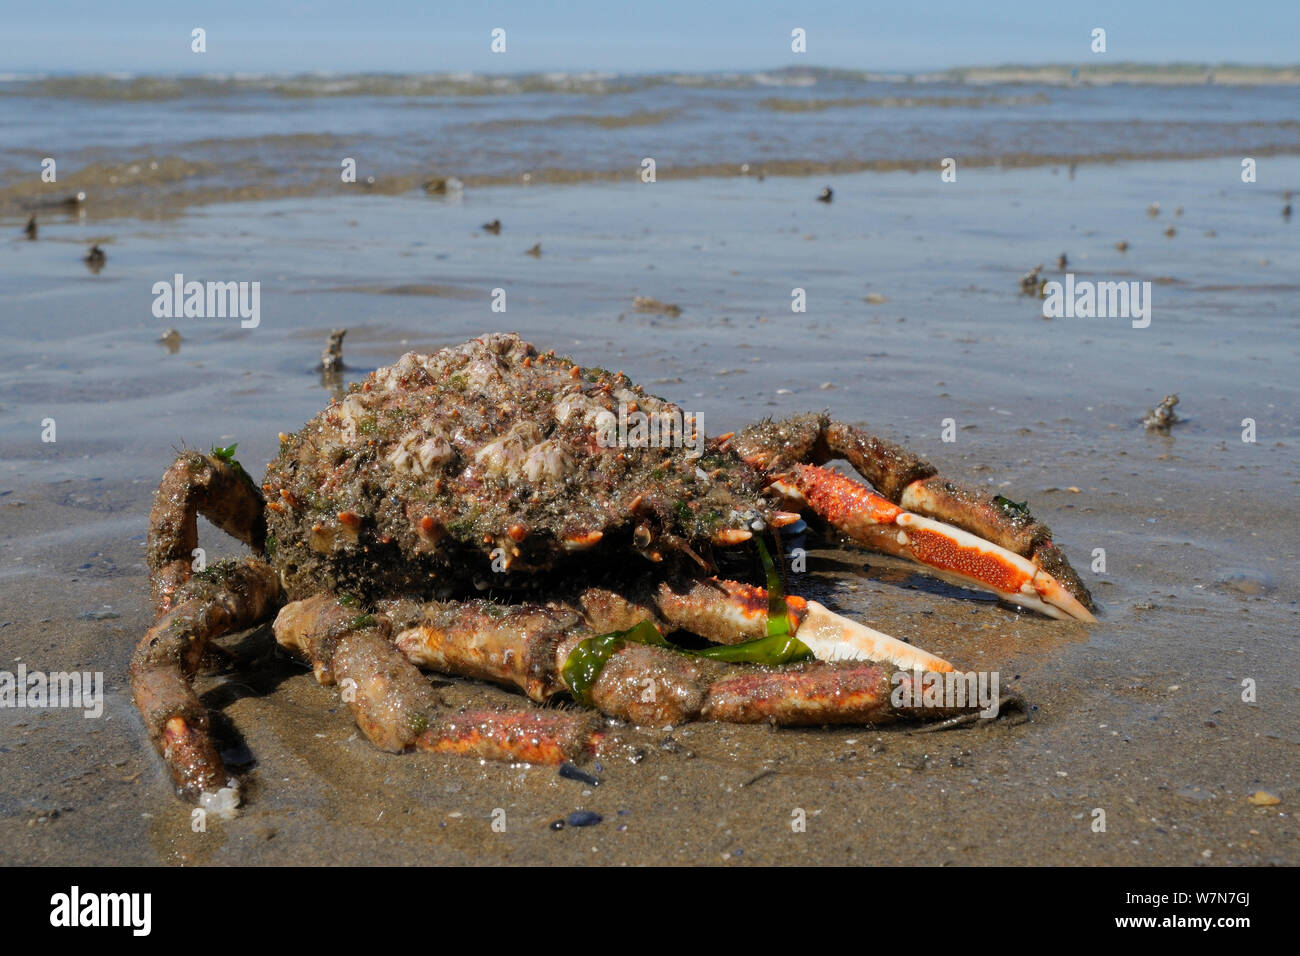 Moulted carapace and legs of Common spider crab / Spiny spider crab (Maja brachydactyla / Maja squinado) washed up on sandy beach. Rhossili Bay, The Gower Peninsula, UK, July. Stock Photo